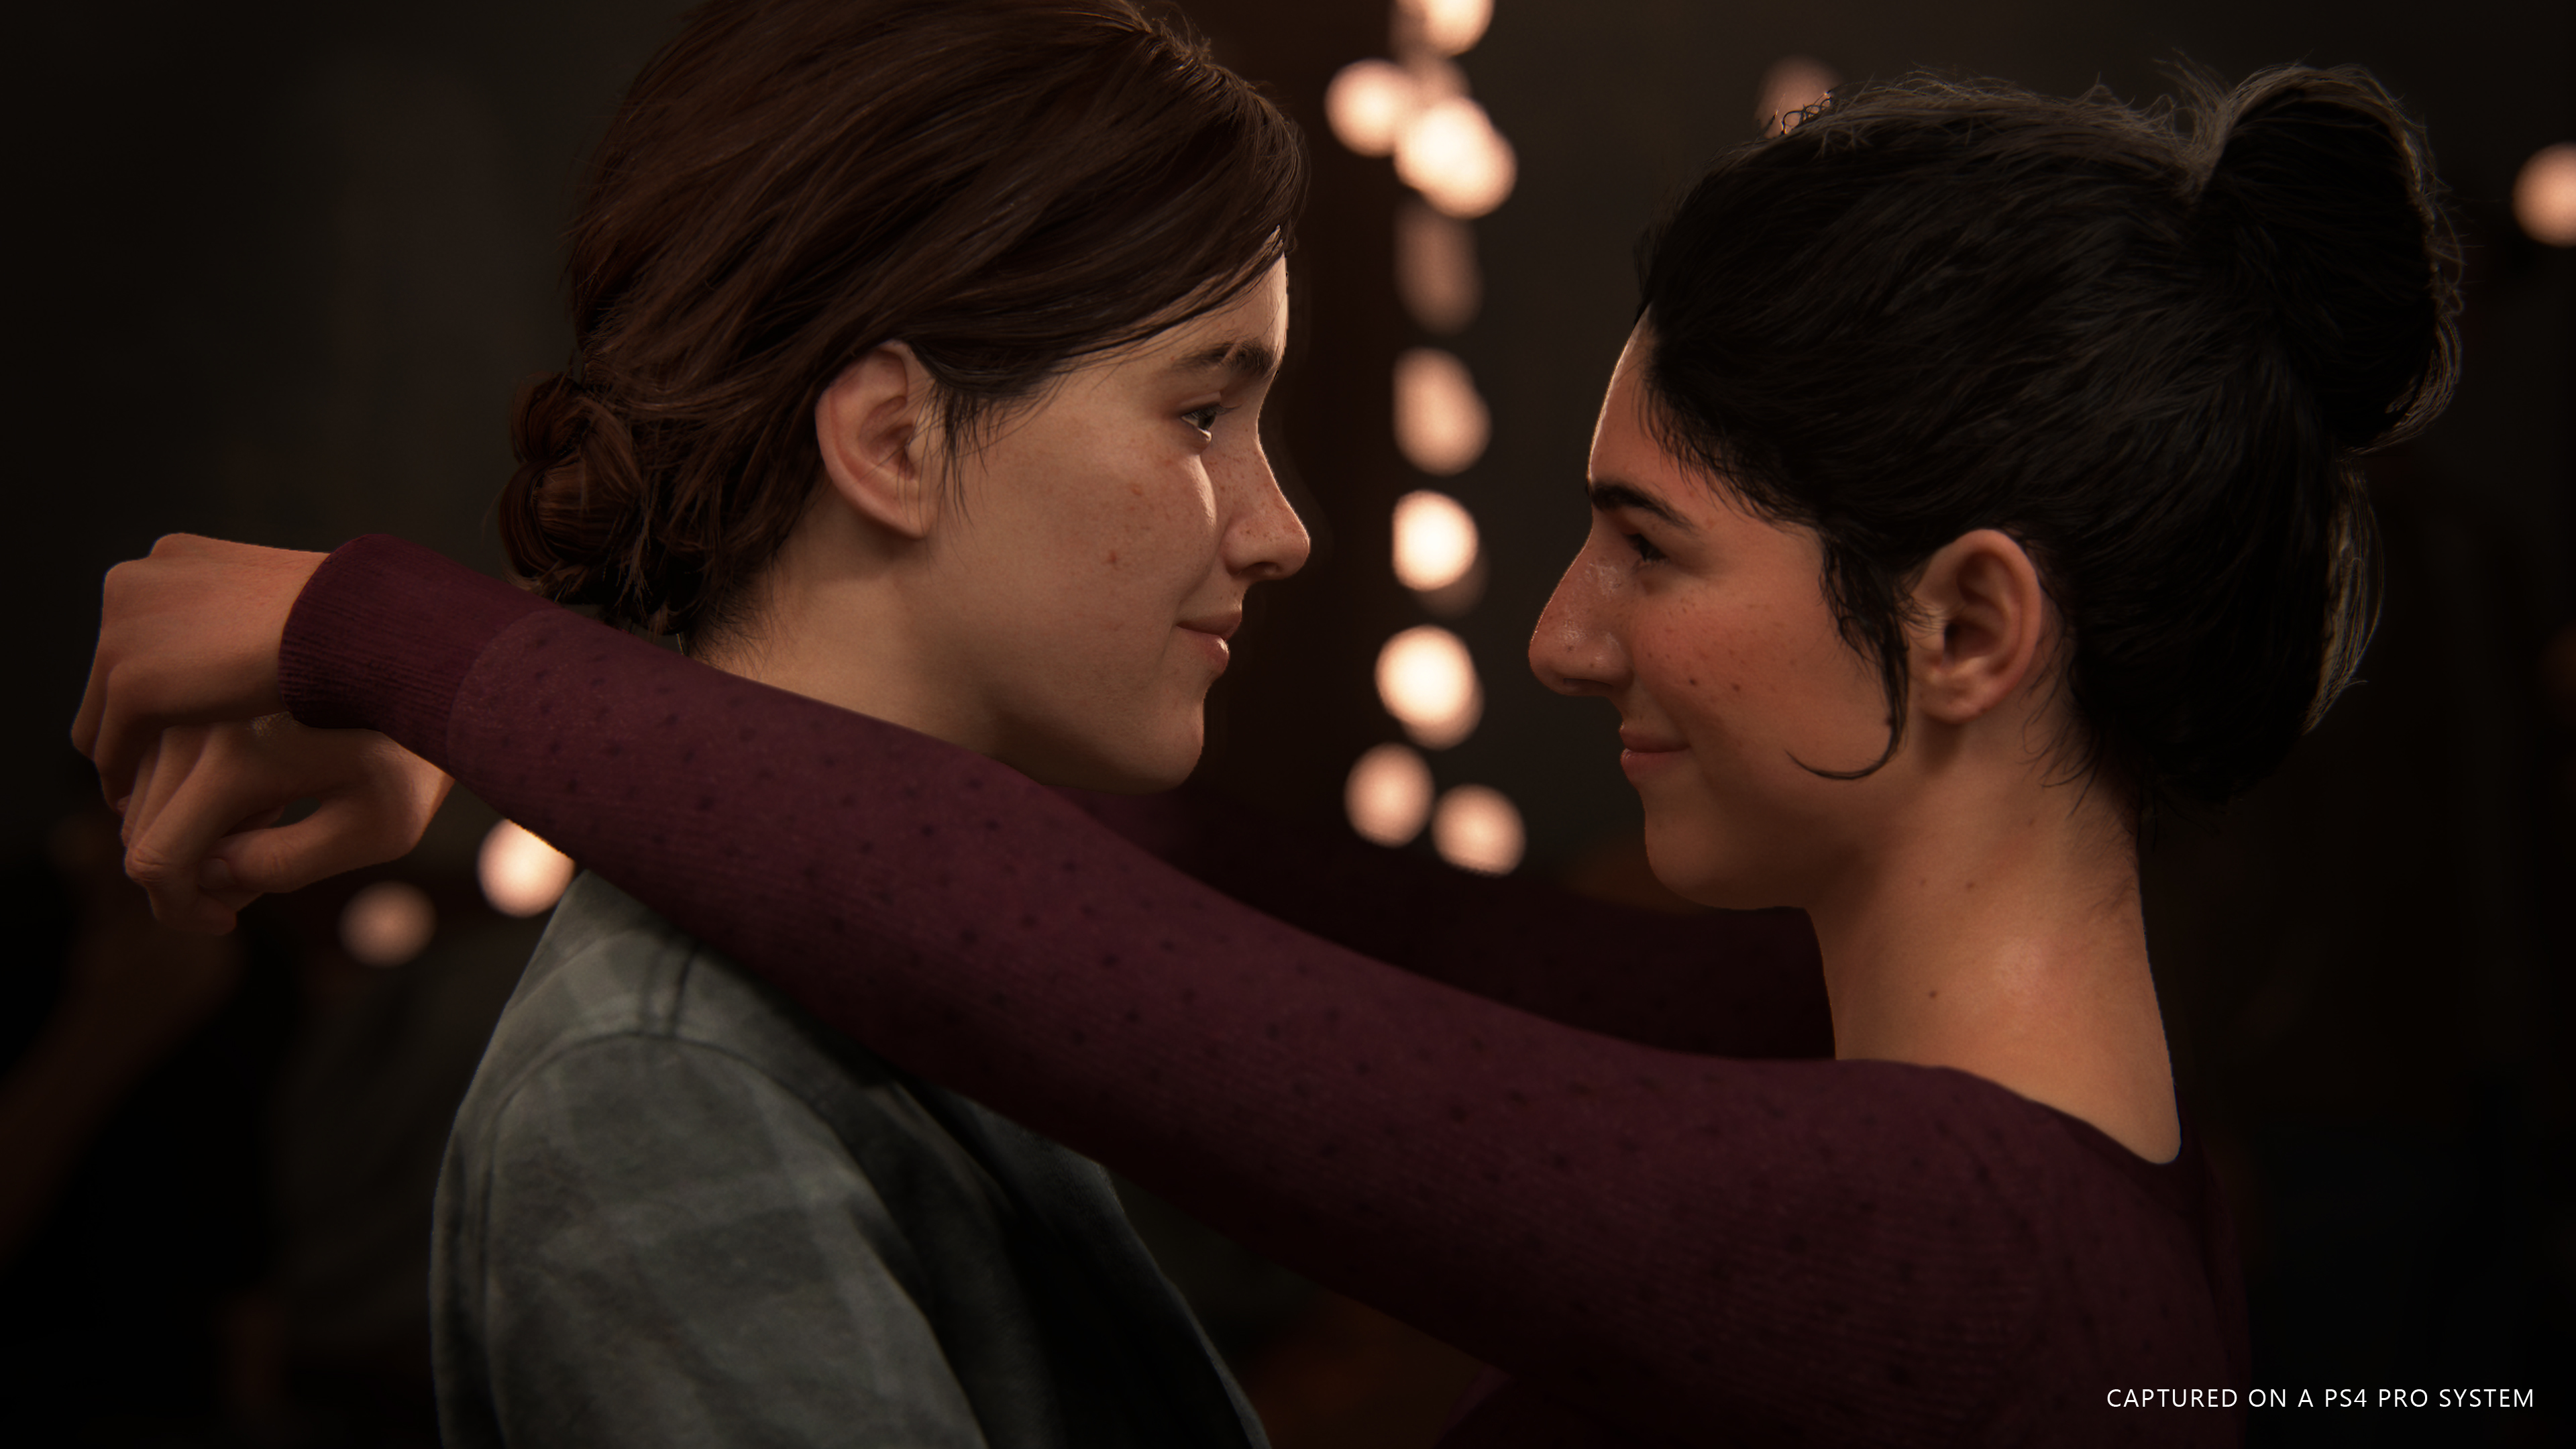 Download Original Download In Resolution - Last Of Us 2 E3 2018 , HD Wallpaper & Backgrounds